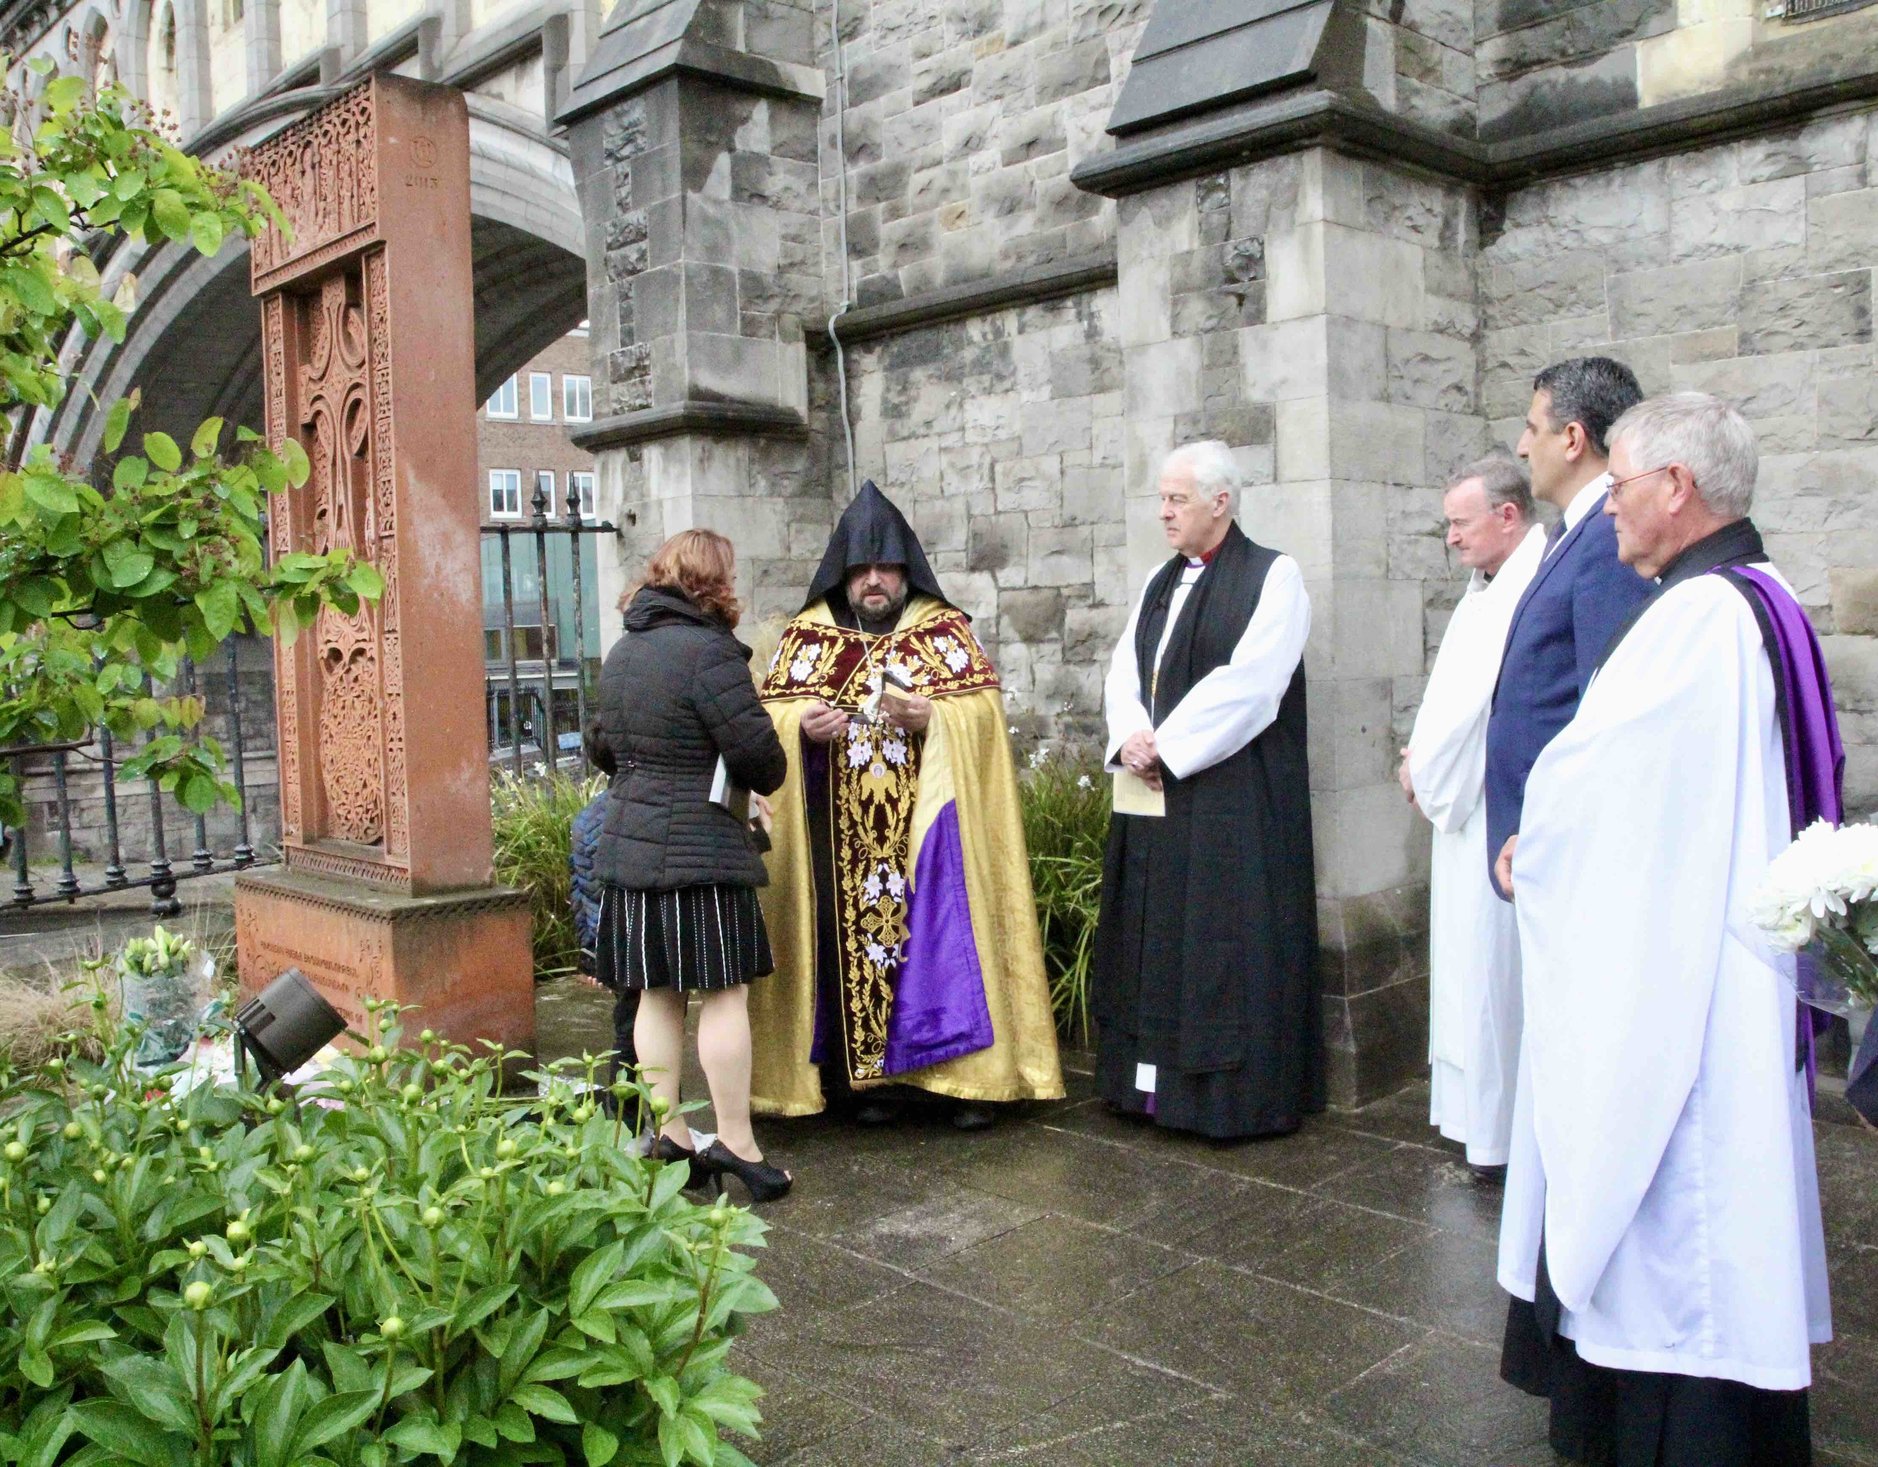 Bishop Hovakim Manukyan, Archbishop Michael Jackson, Honorary Armenian Consul, Ohan Yergainharsian and other participating clergy at the Khachkar memorial in the grounds of Christ Church Cathedral.